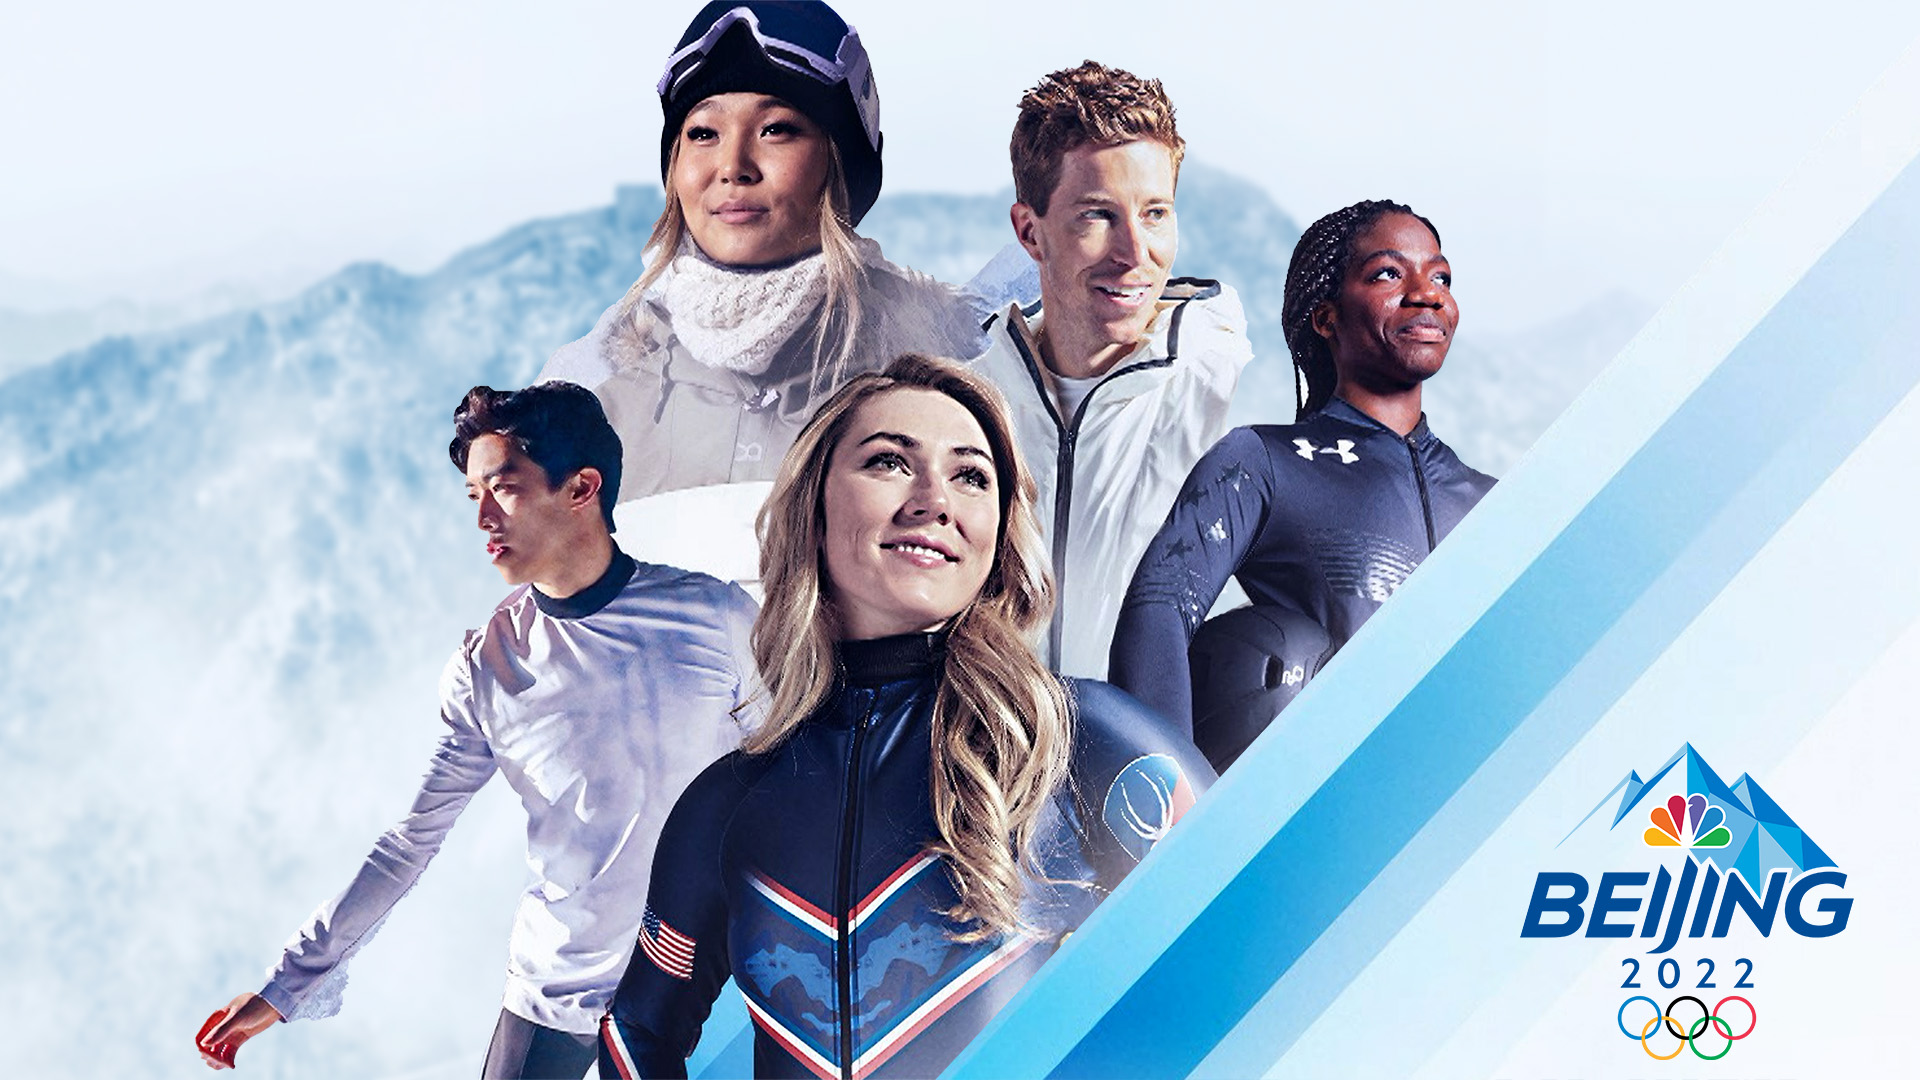 Nbc Olympic Schedule 2022 Olympics Schedule 2022: Winter Olympics Events And How To Watch